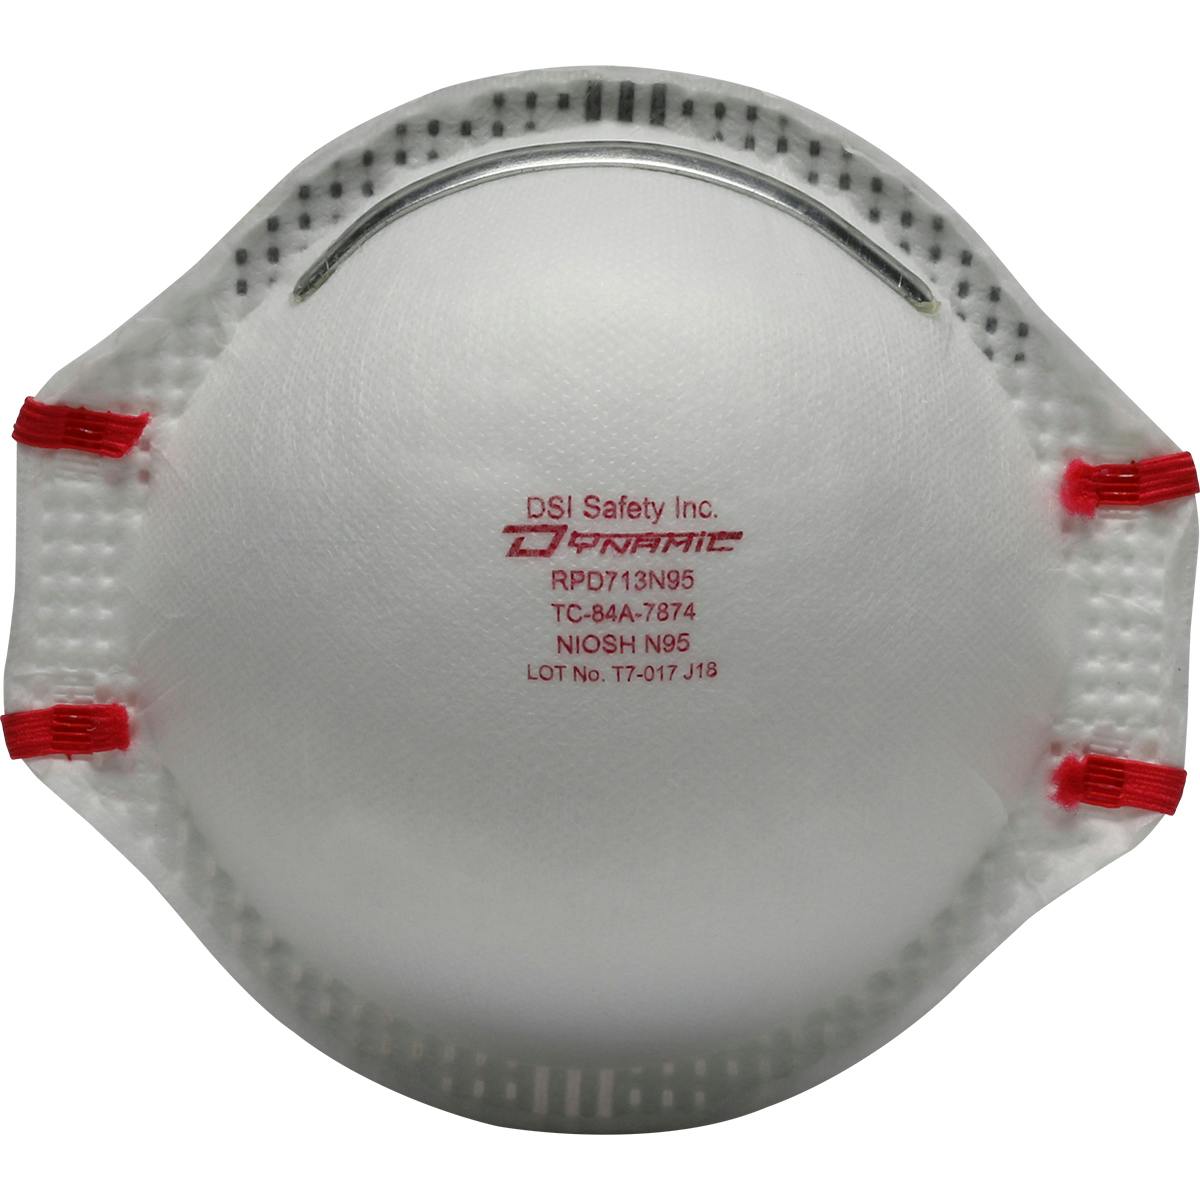 Deluxe N95 Disposable Respirator - 20 Pack, White (270-RPD713N95) - OS_1